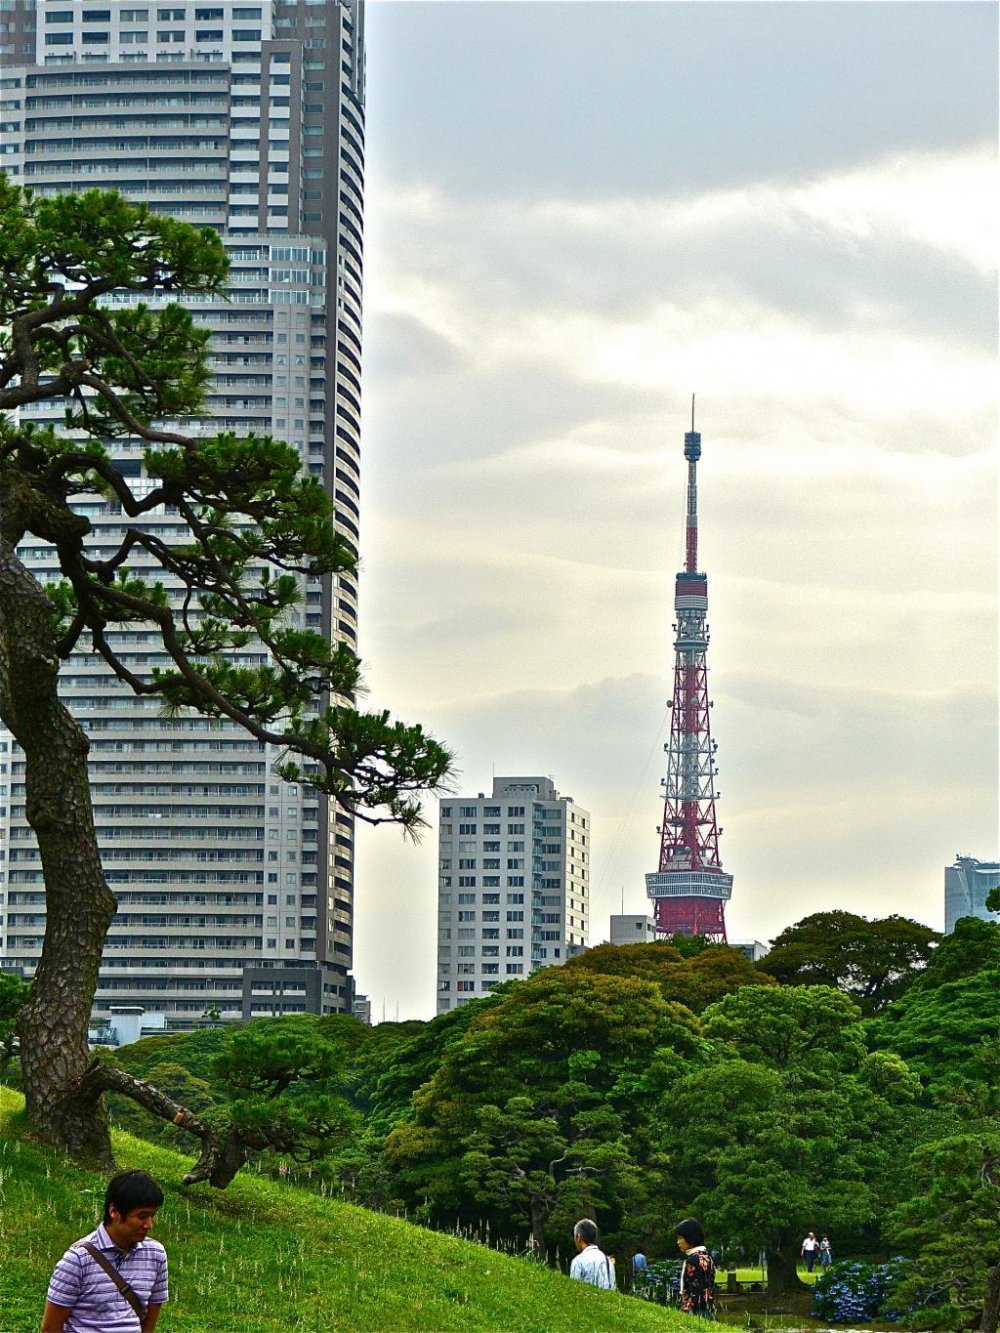 Tokyo Tower is not far from the garden.